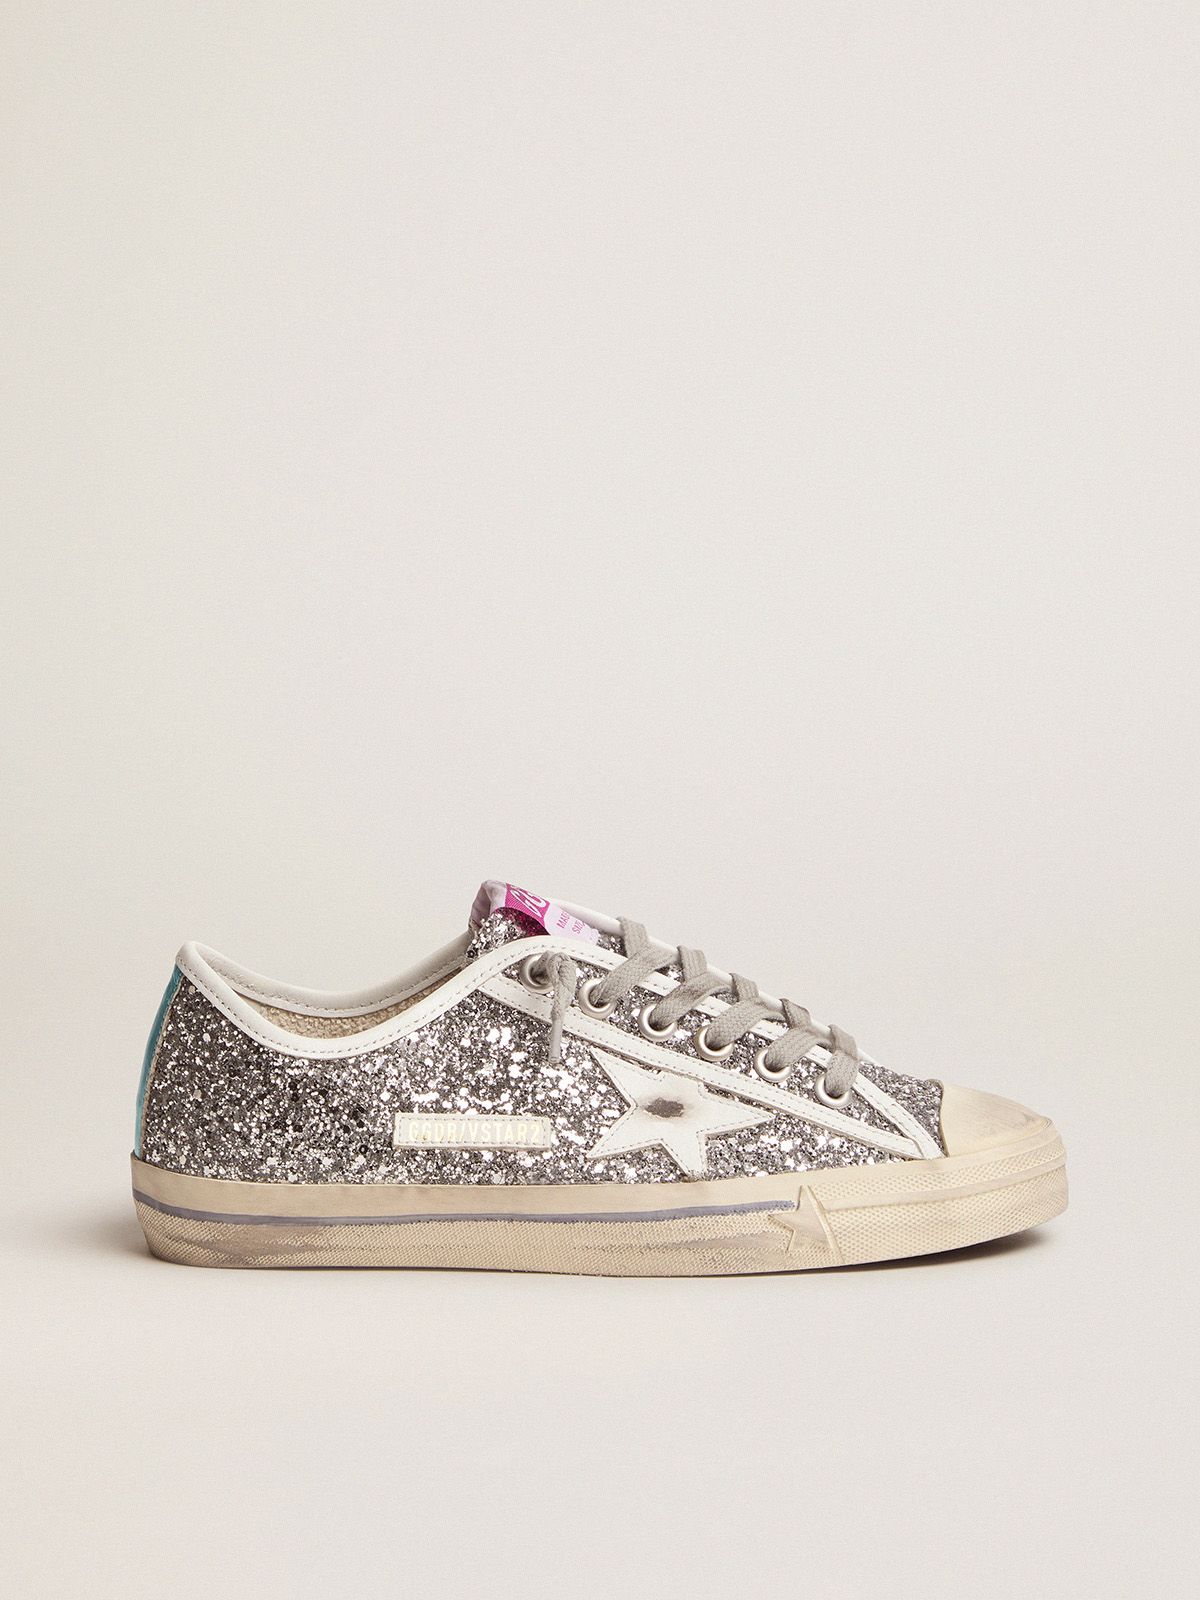 V-Star sneakers with silver glitter